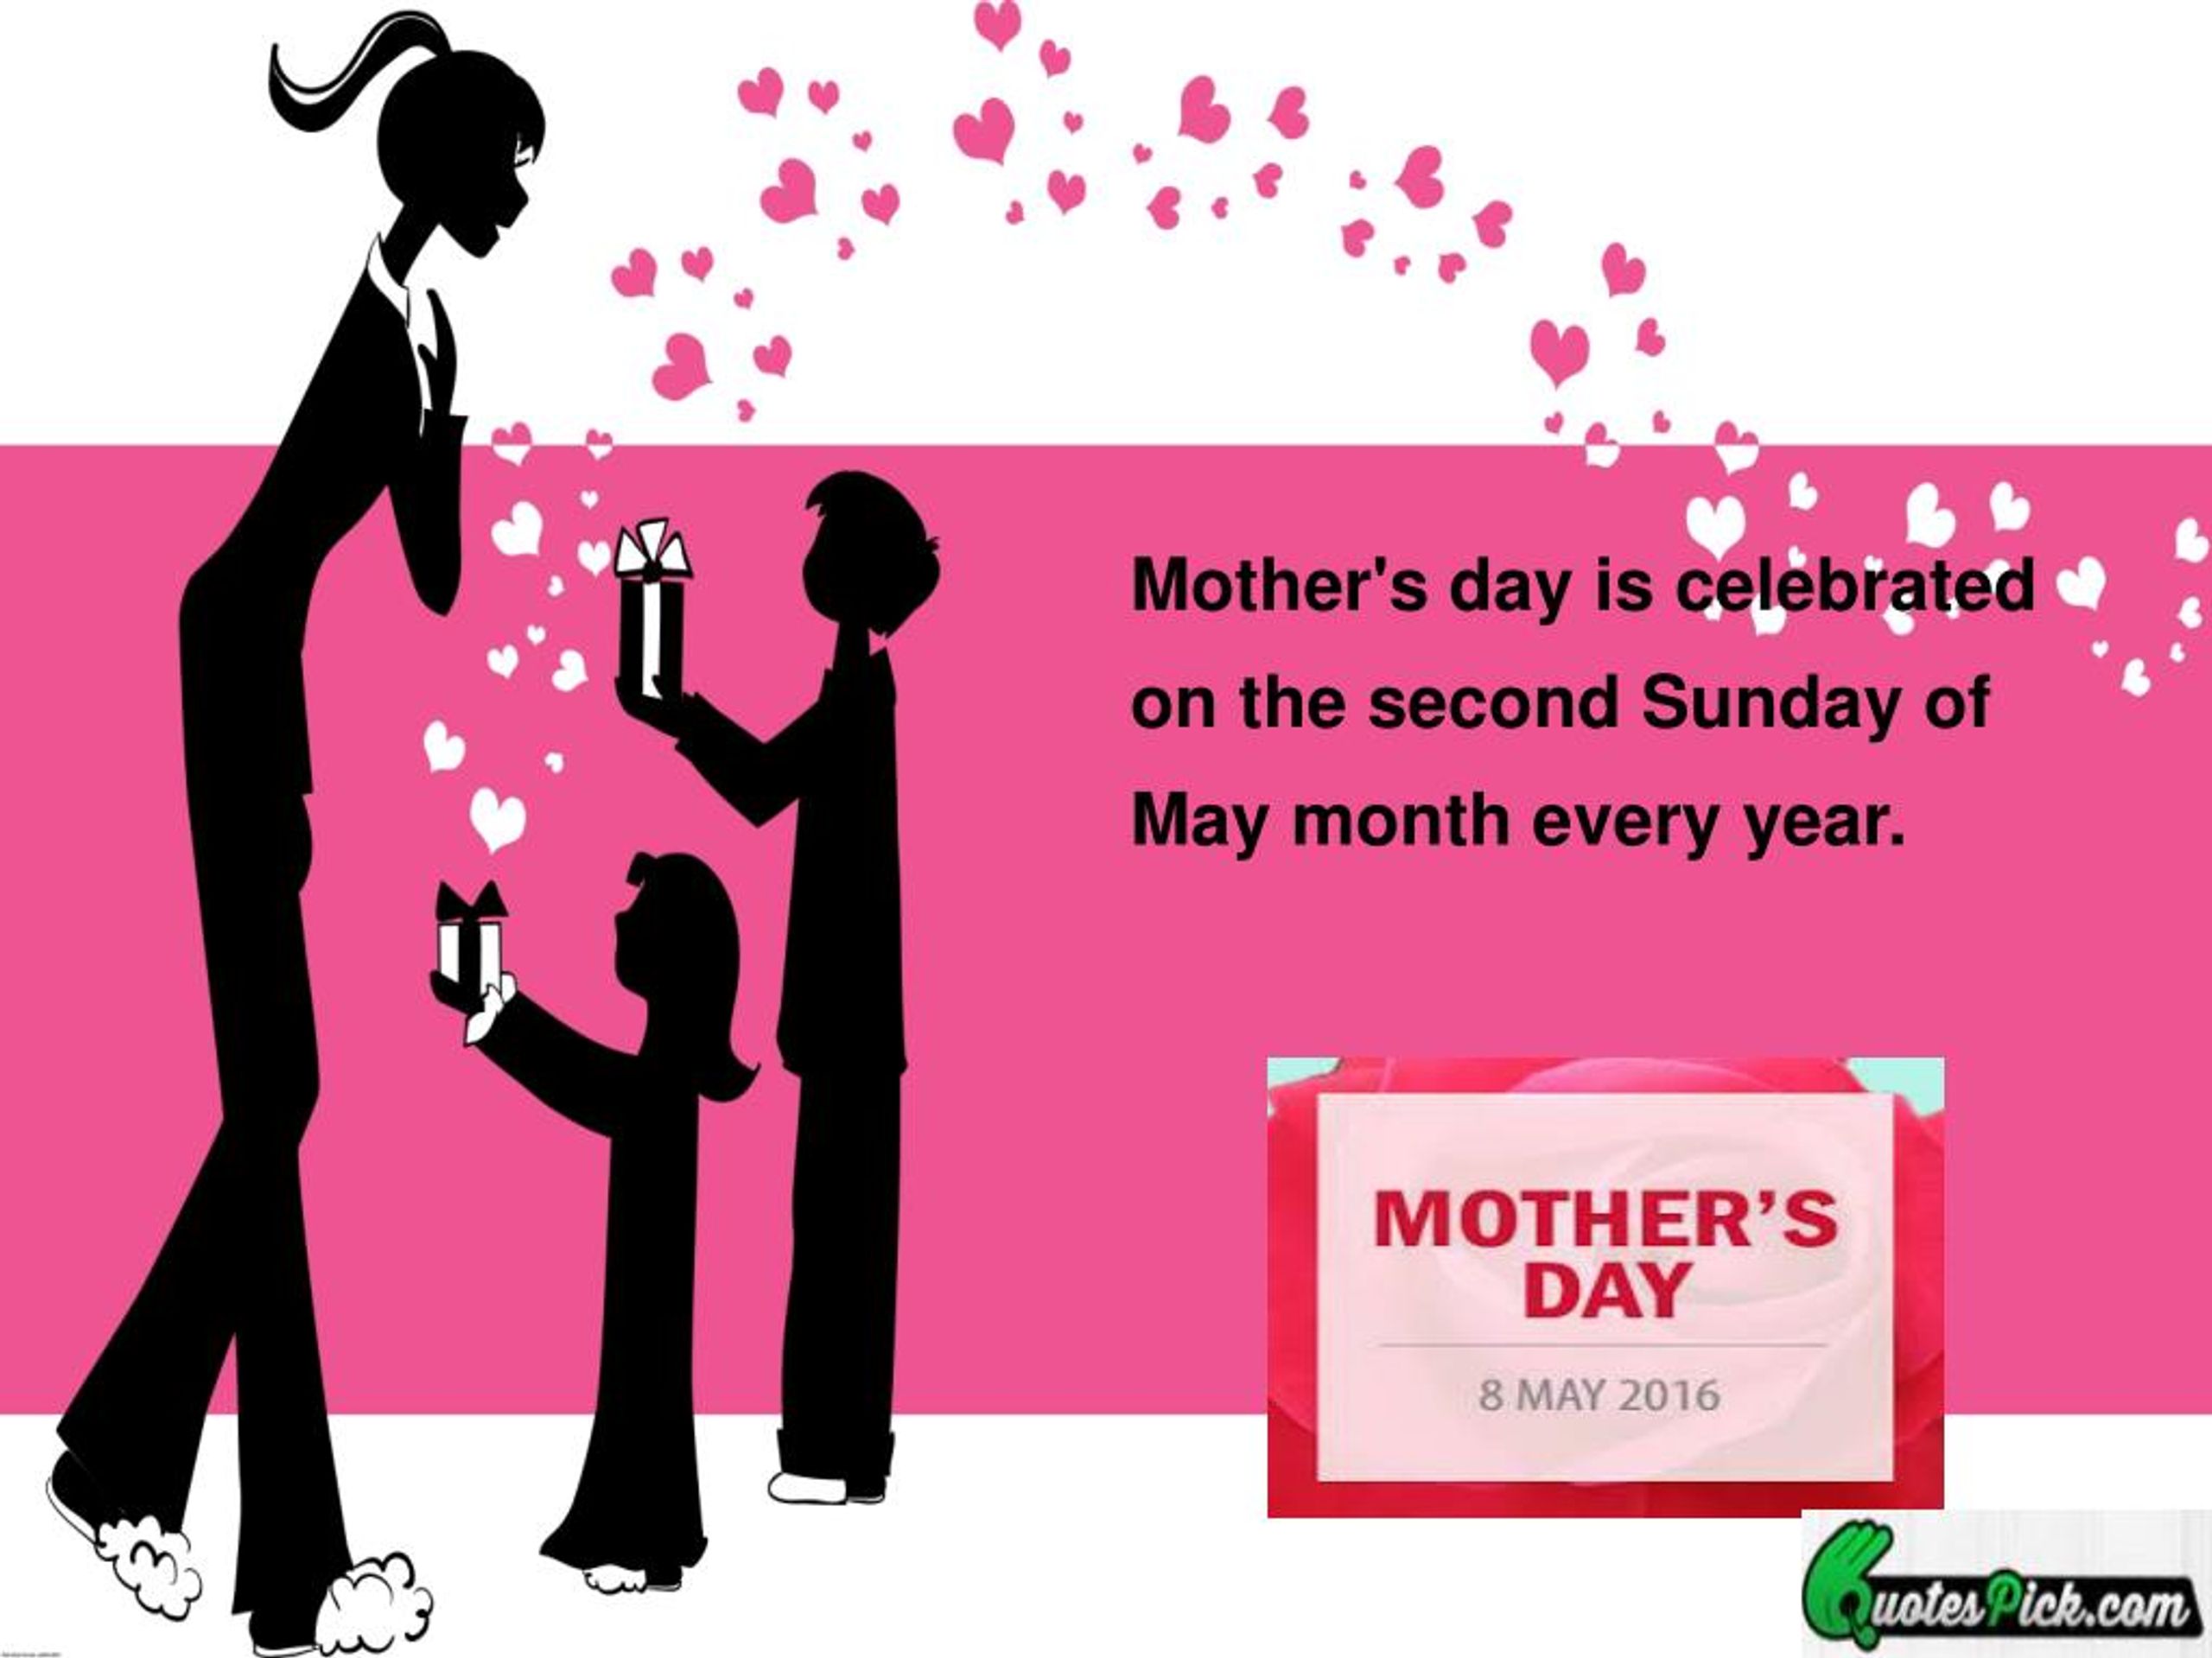 Mother's day is celebrated on the second Sunday of May month.